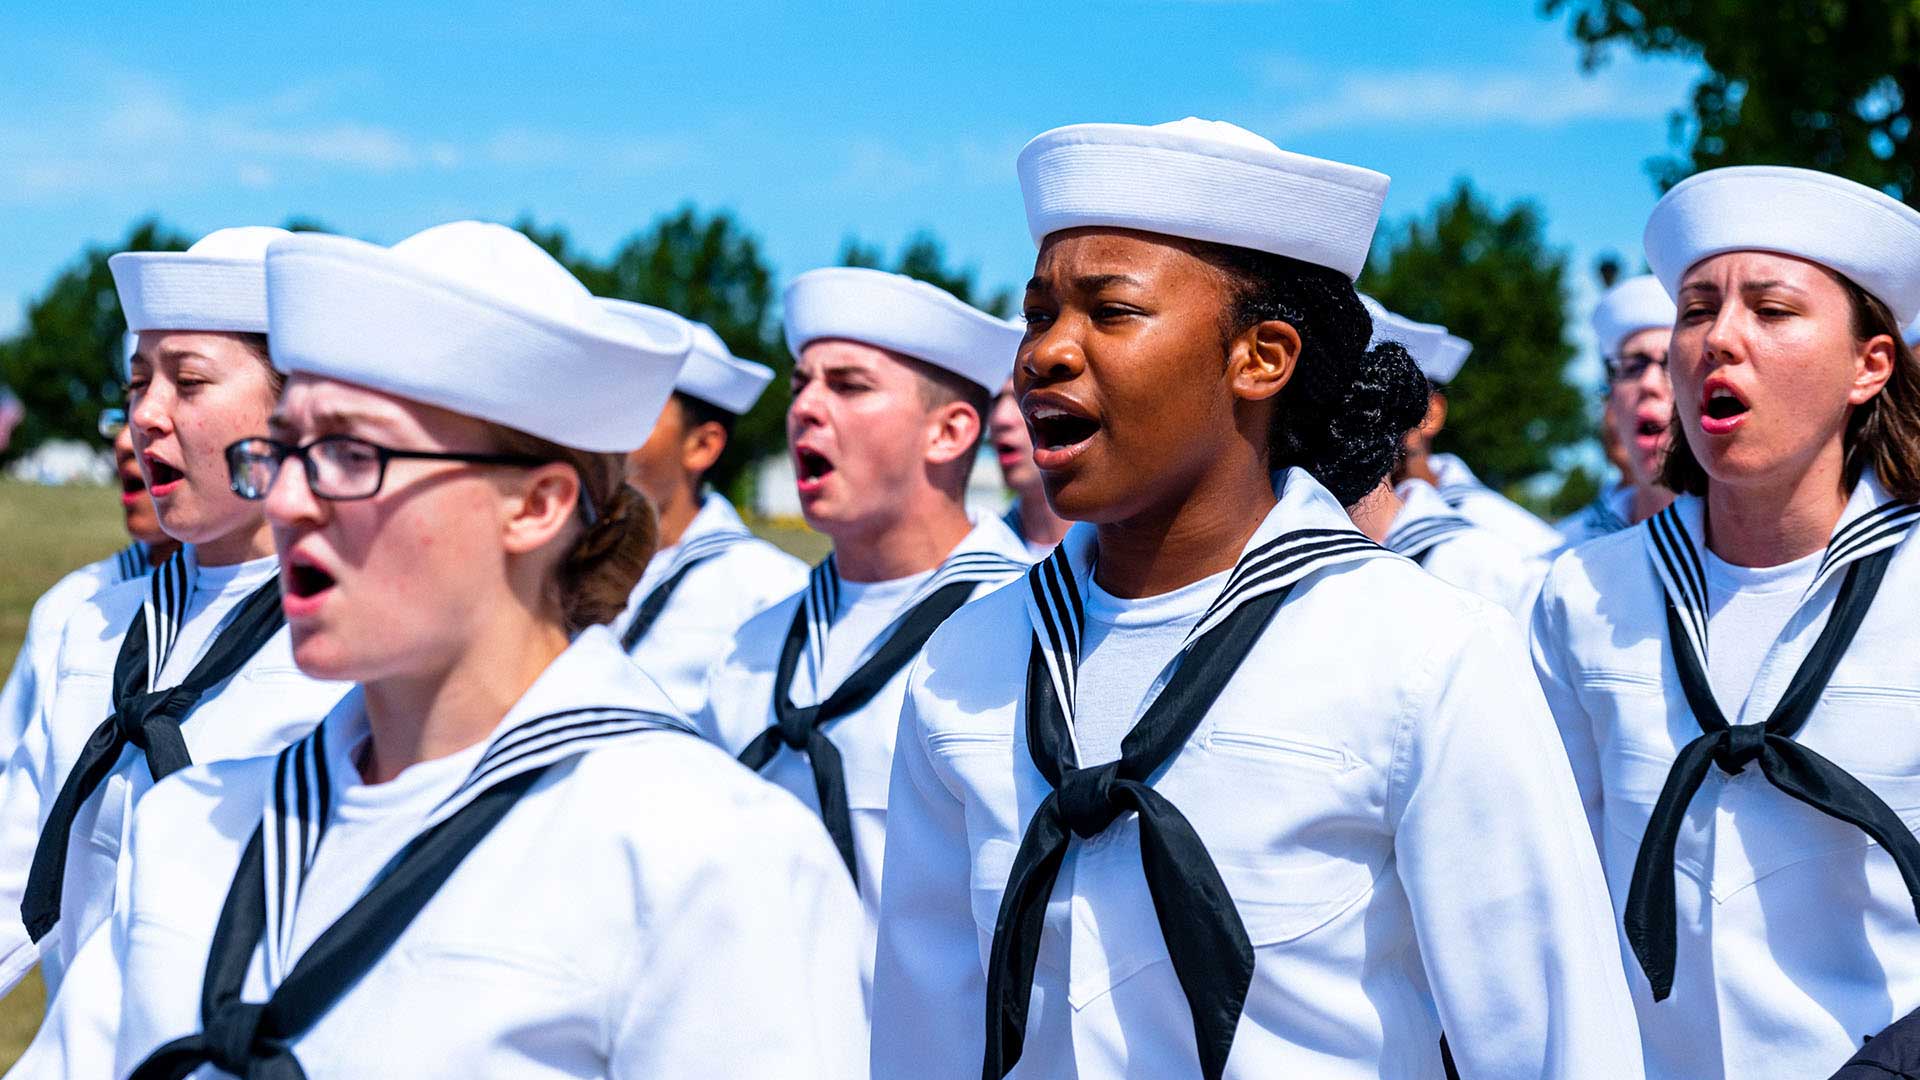 Navy Sailors recite a cadence while marching at Recruit Training Command, or Navy Boot Camp, in Great Lakes, IL. 